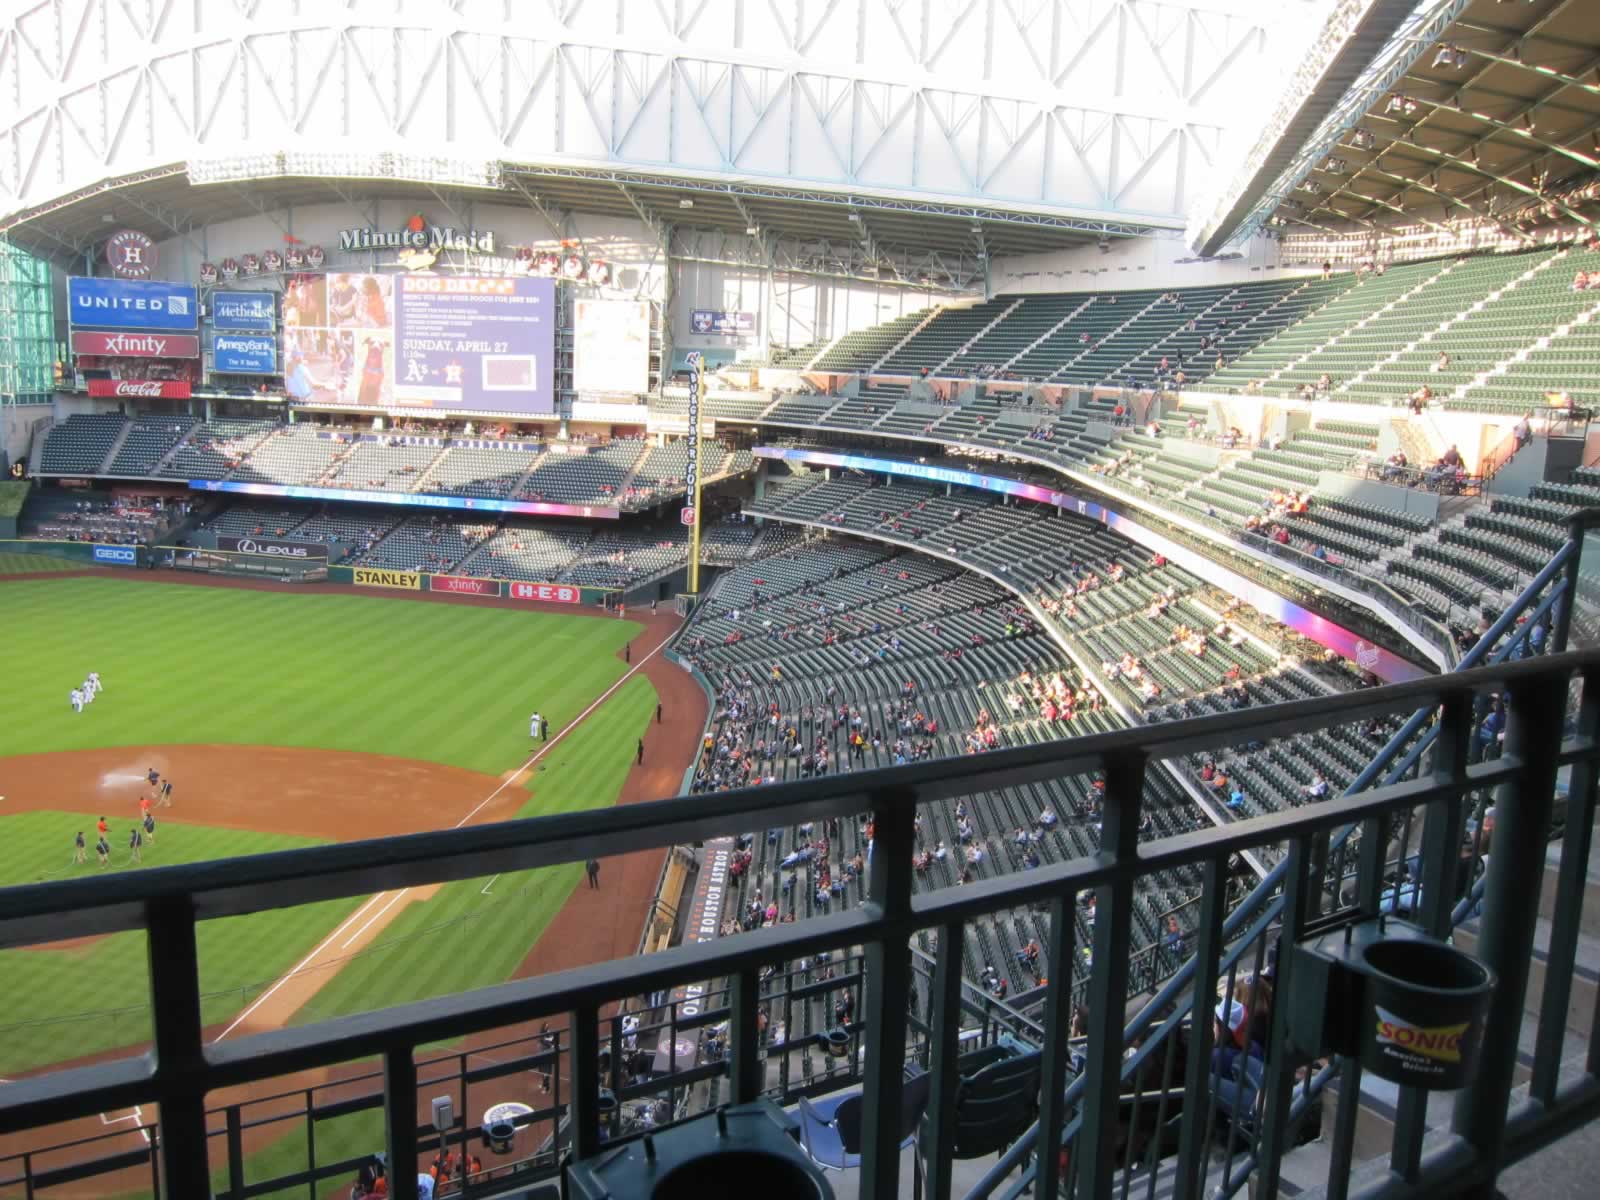 Good Upper Deck Positioning Spoiled By Railings Minute Maid Park Section Review